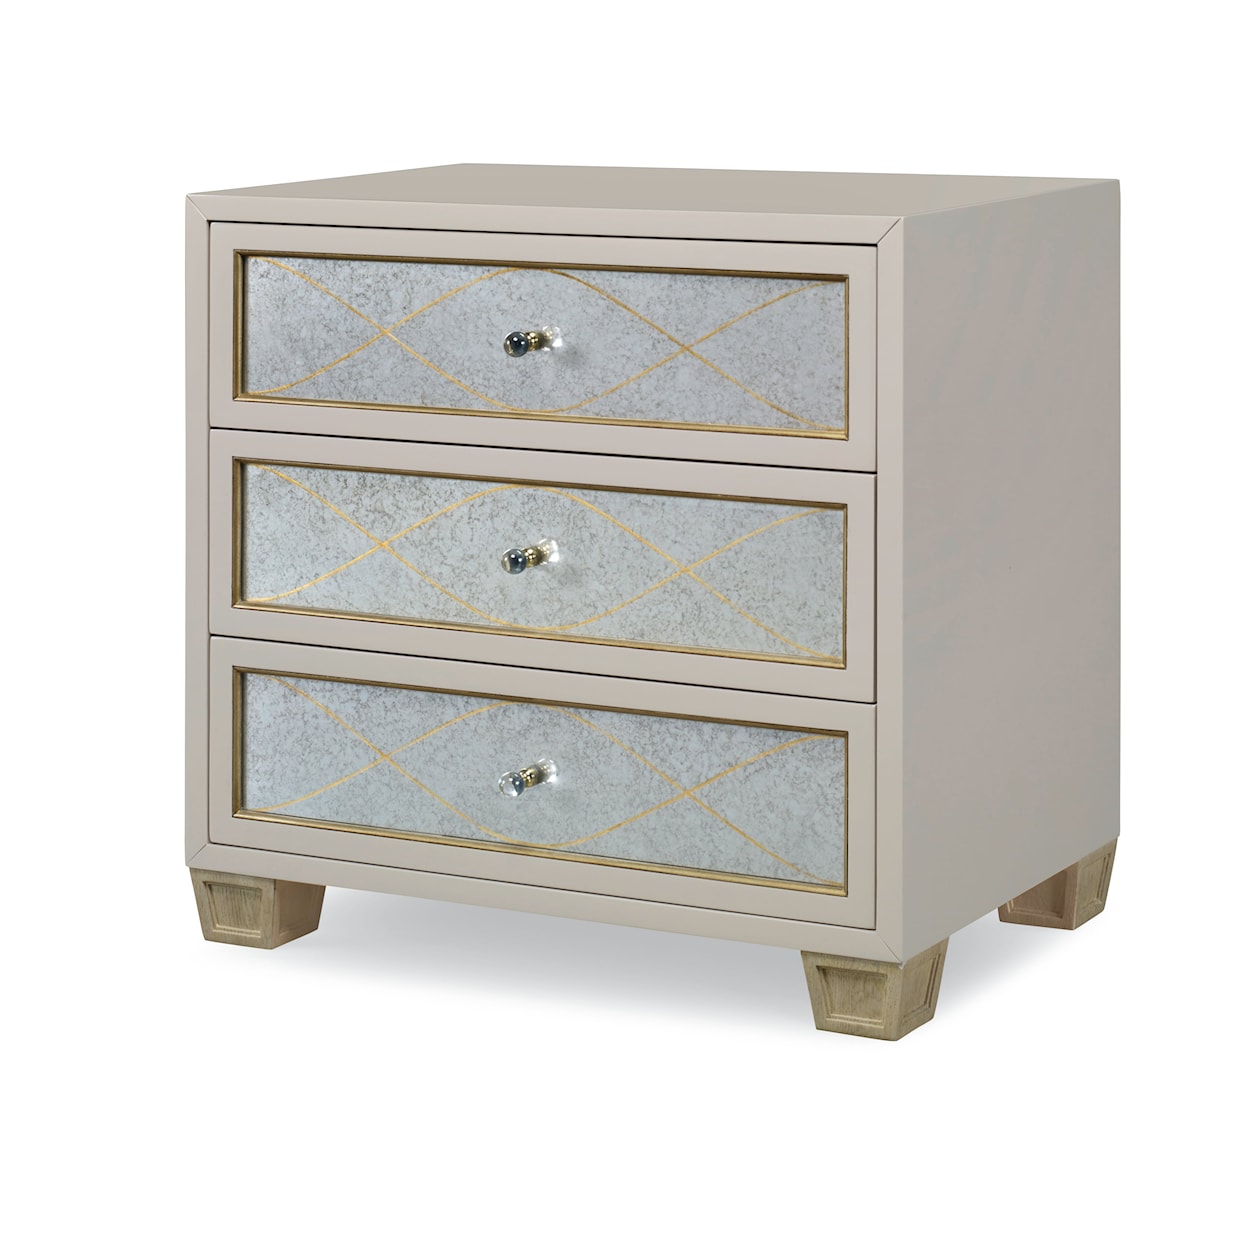 Century Carrier and Company Case Nightstands